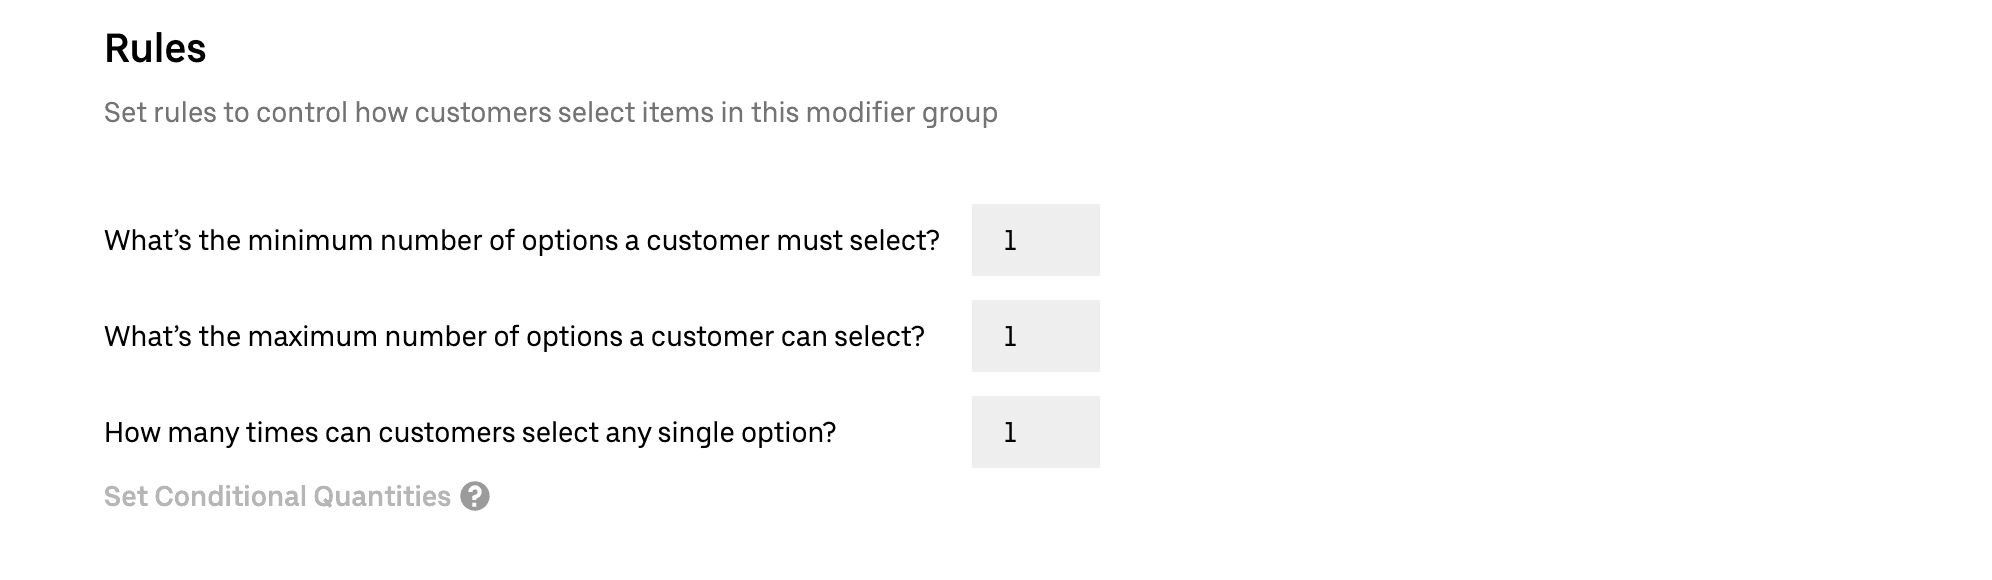 Modifier group rules